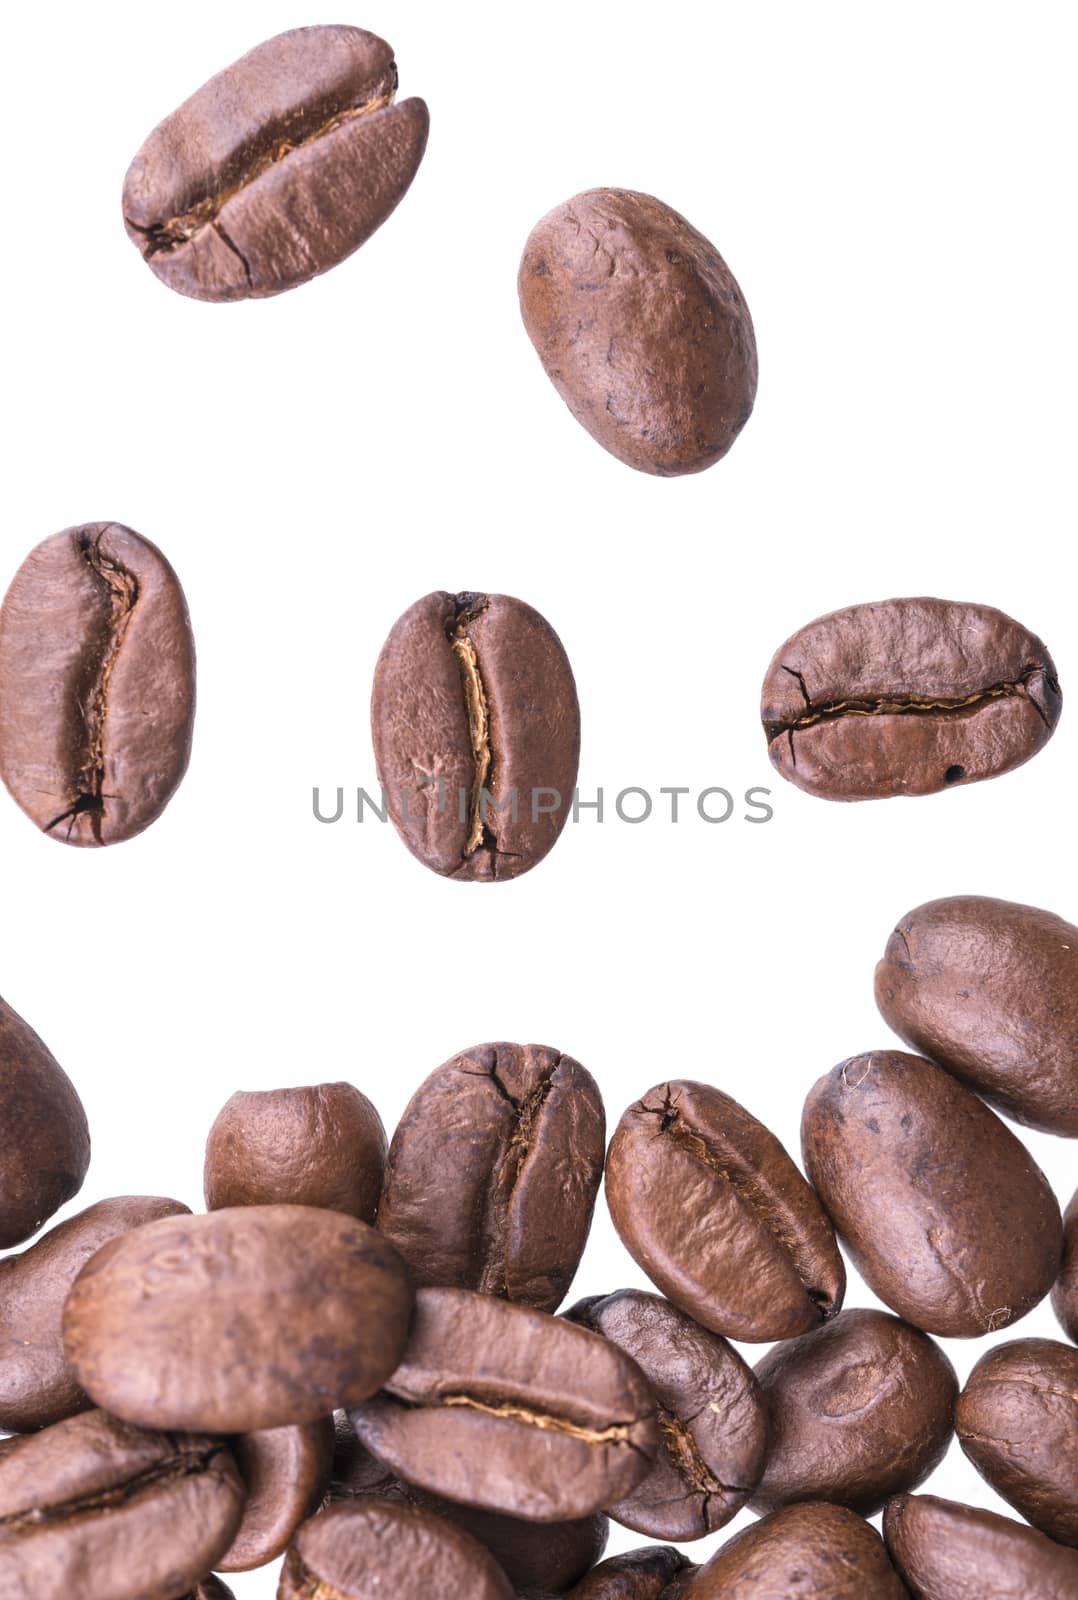 Closeup of coffee beans isolated on white background.